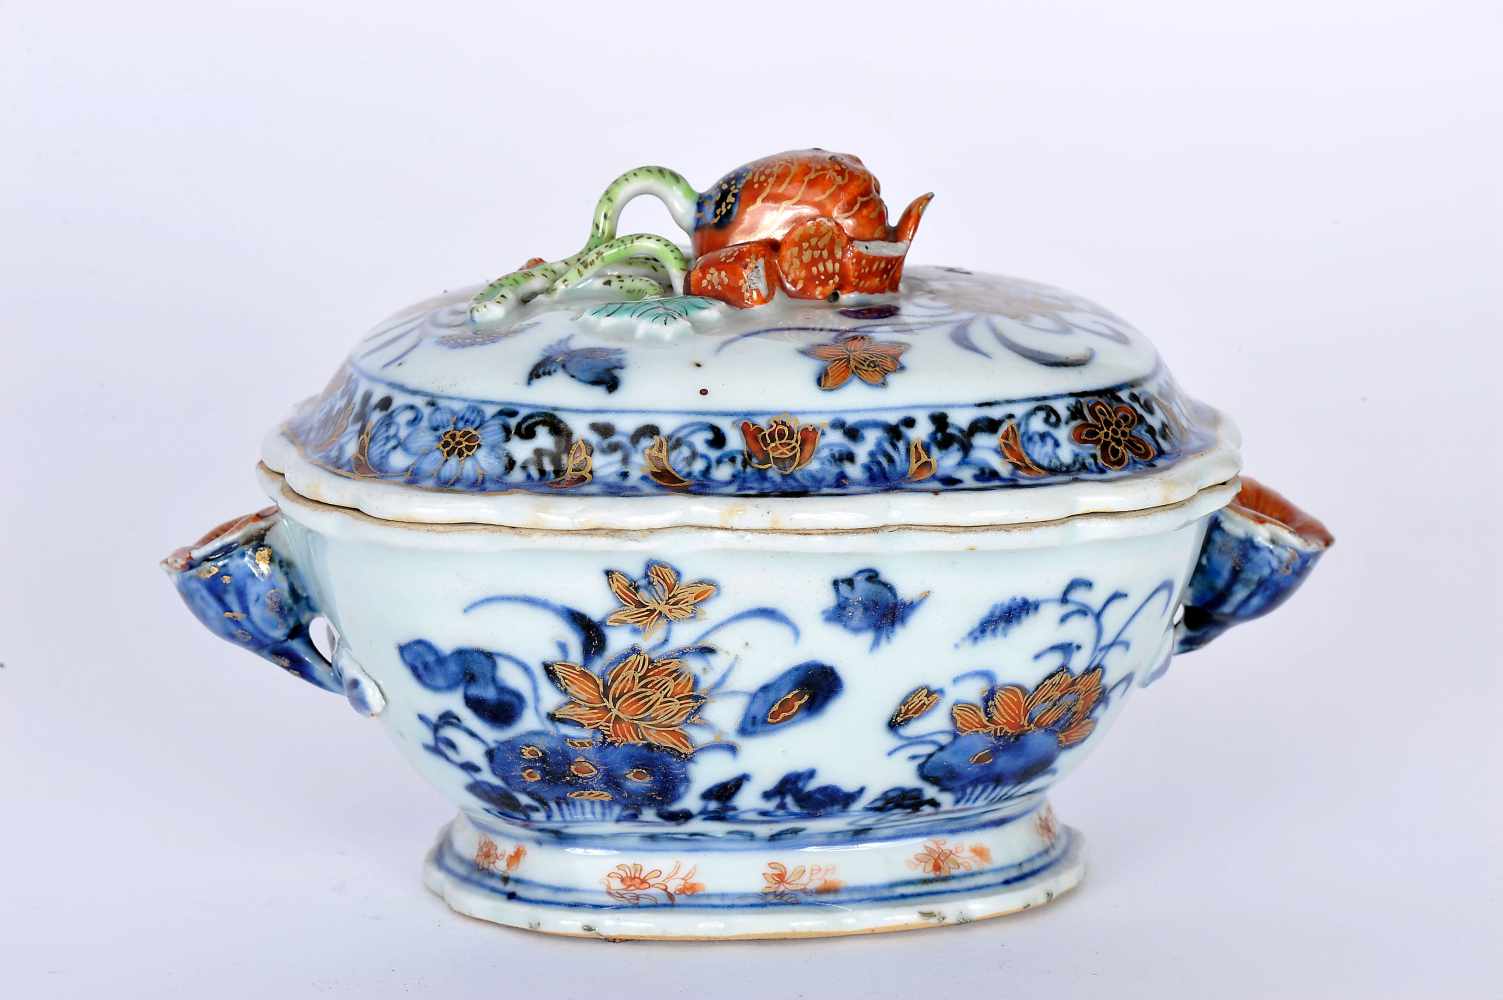 A Smal Scalloped Tureen, Chinese export porcelain, polychrome and gilt decoration "Flowers", handles